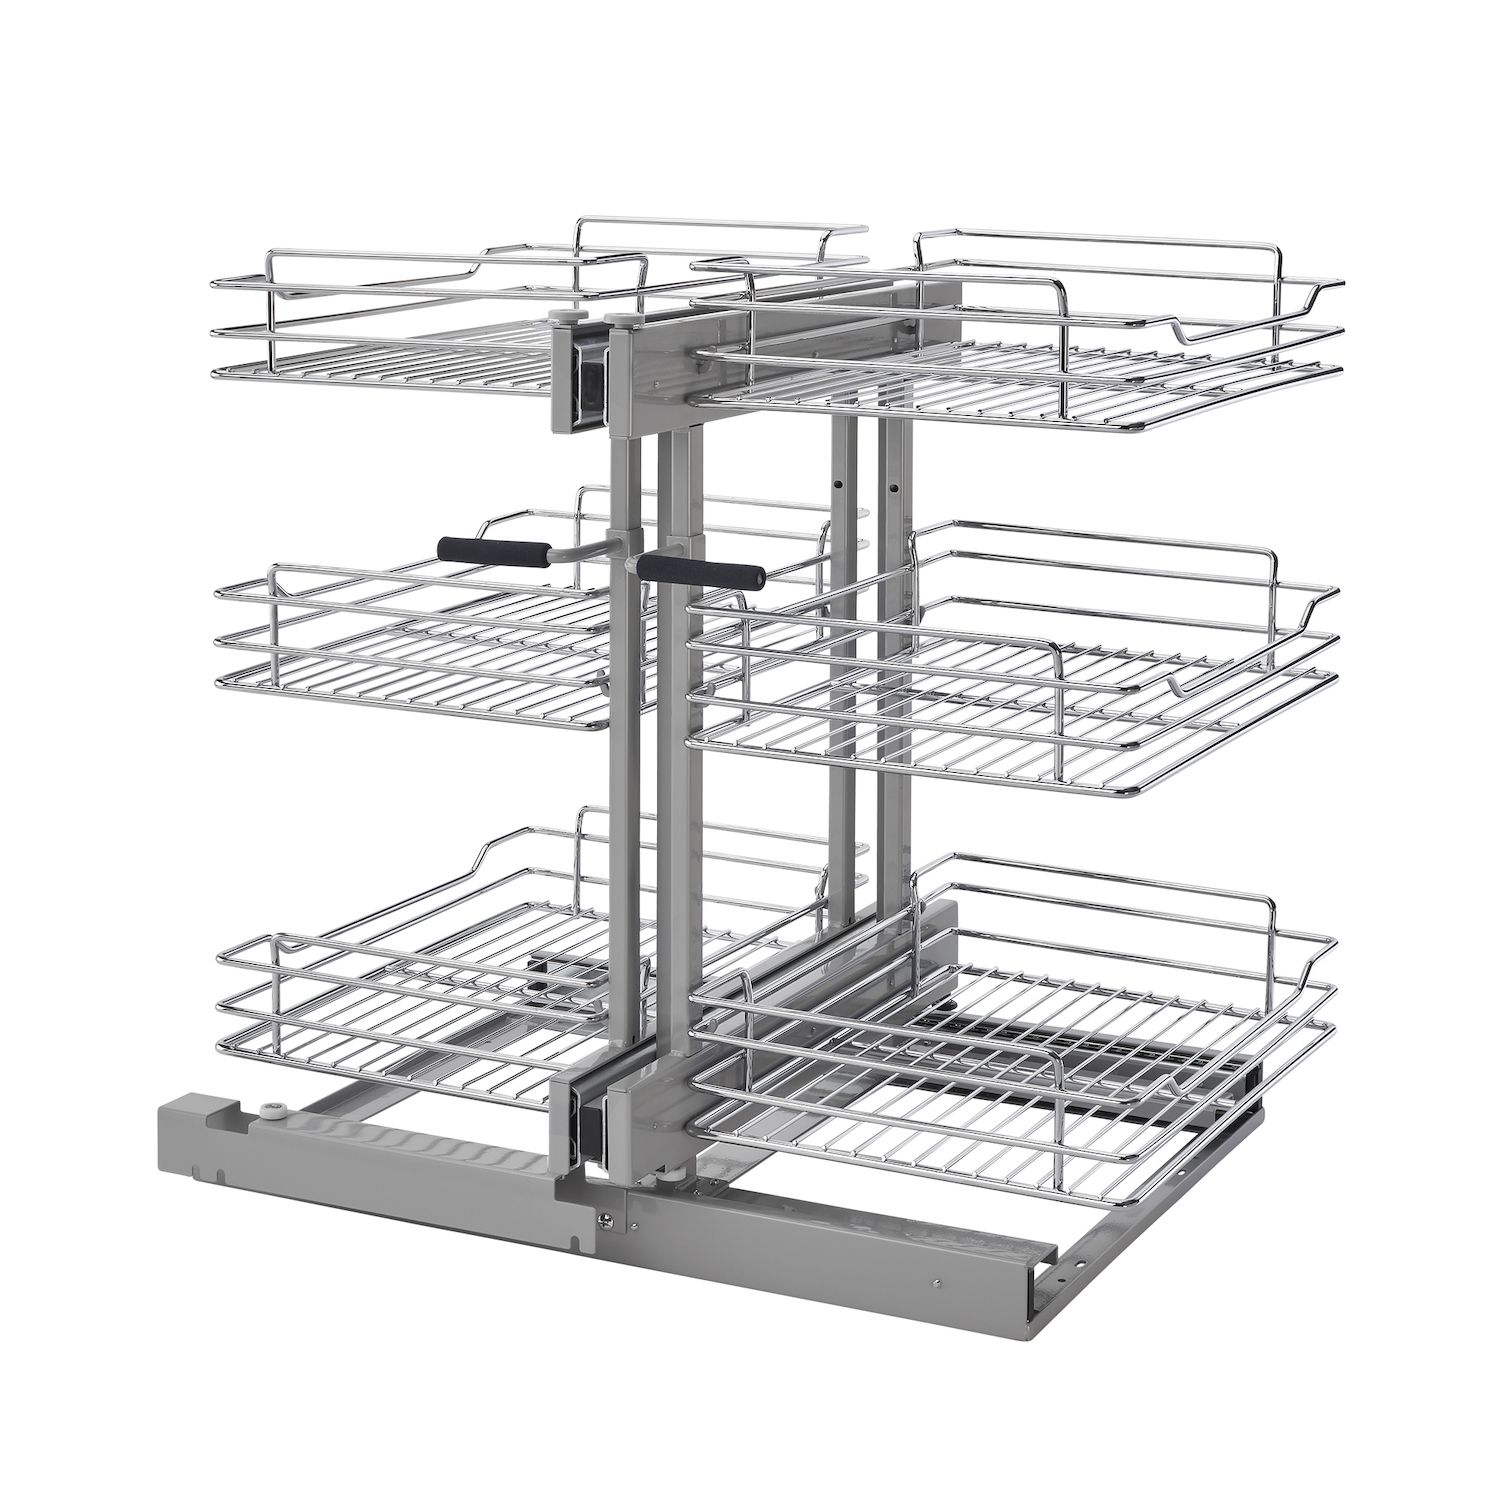 Rev-a-shelf 2-tier Kitchen Cabinet Pull Out Shelf And Drawer Organizer  Slide Out Pantry Storage Basket In Multiple Sizes, 12 X 18 In,  5wb2-1218cr-1 : Target